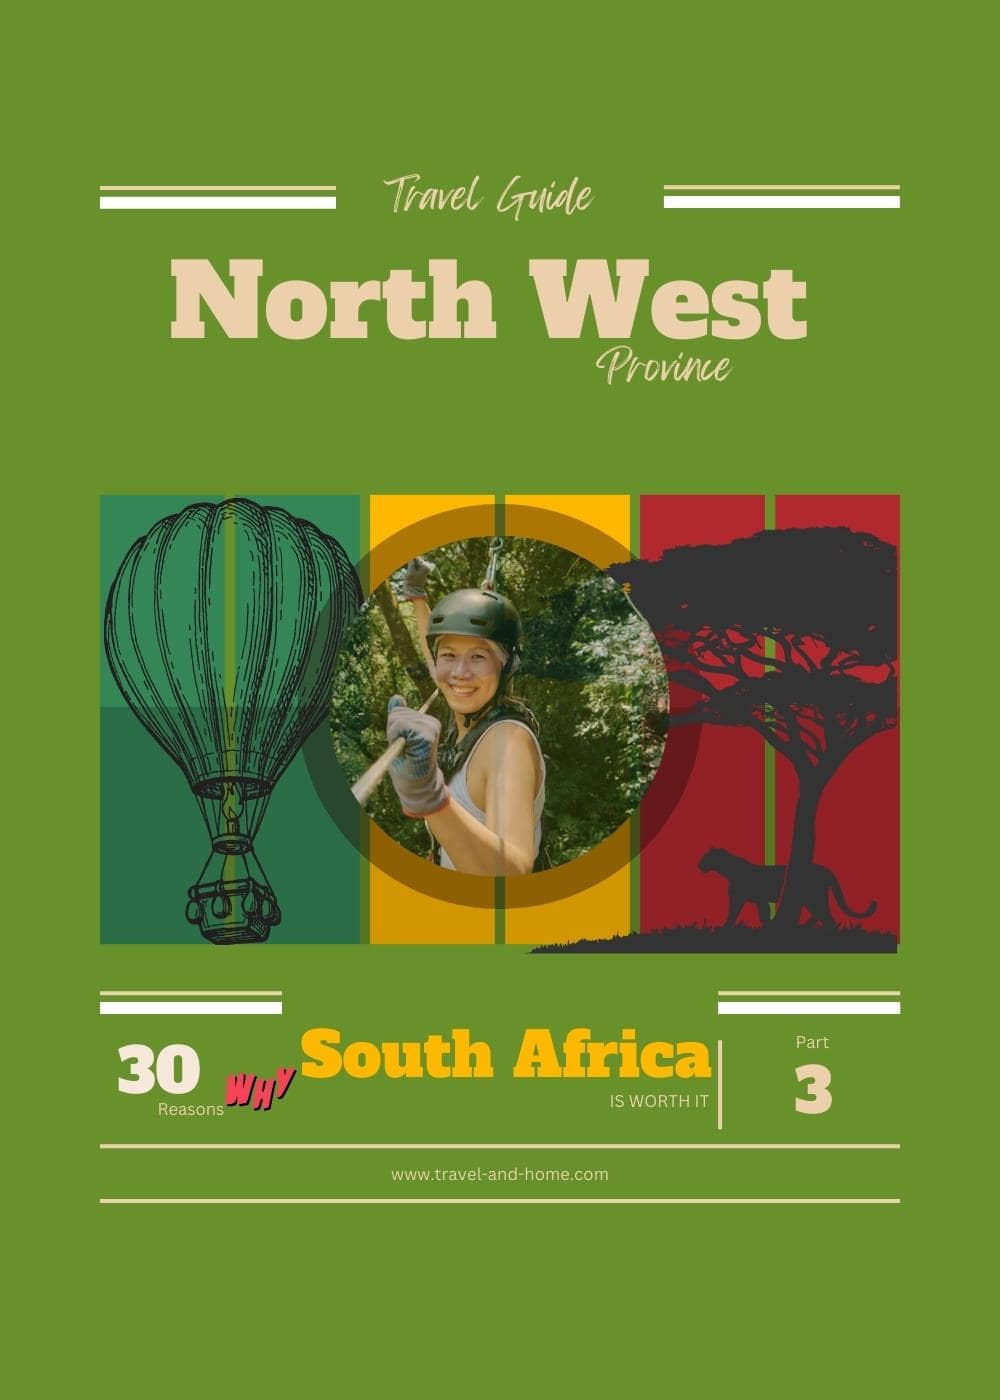 North West Province travel guide, South Africa, things to do in the northwest province, travel and home min